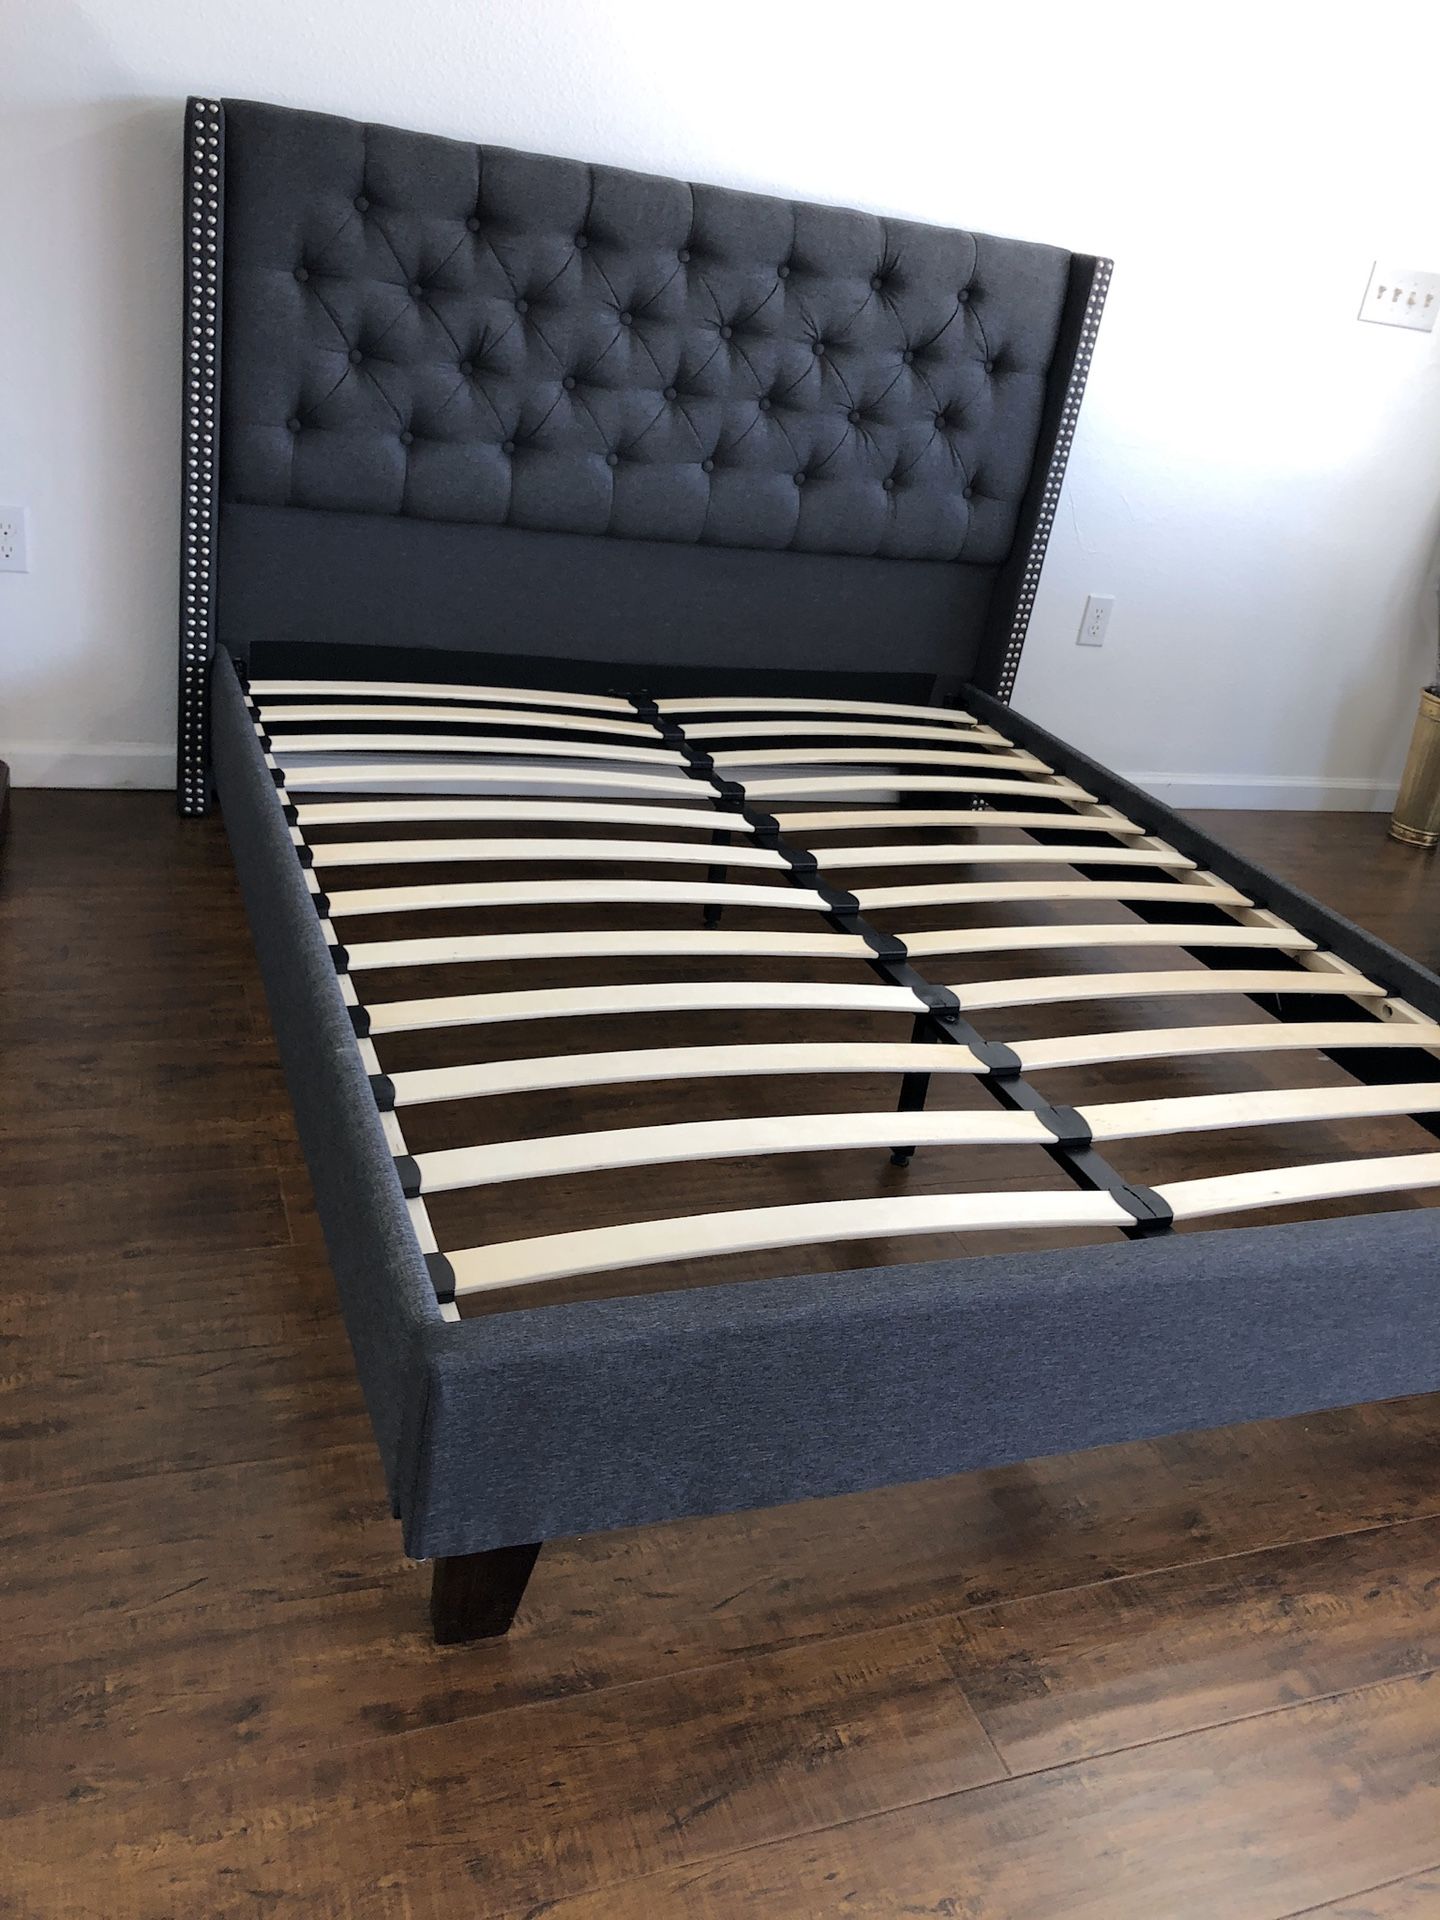 QUEEN BED FRAME $200 $20 DELIVERY 🚚 💥 • Brand new in box • Hardware & instructions included • Price is firm • We do not assemble